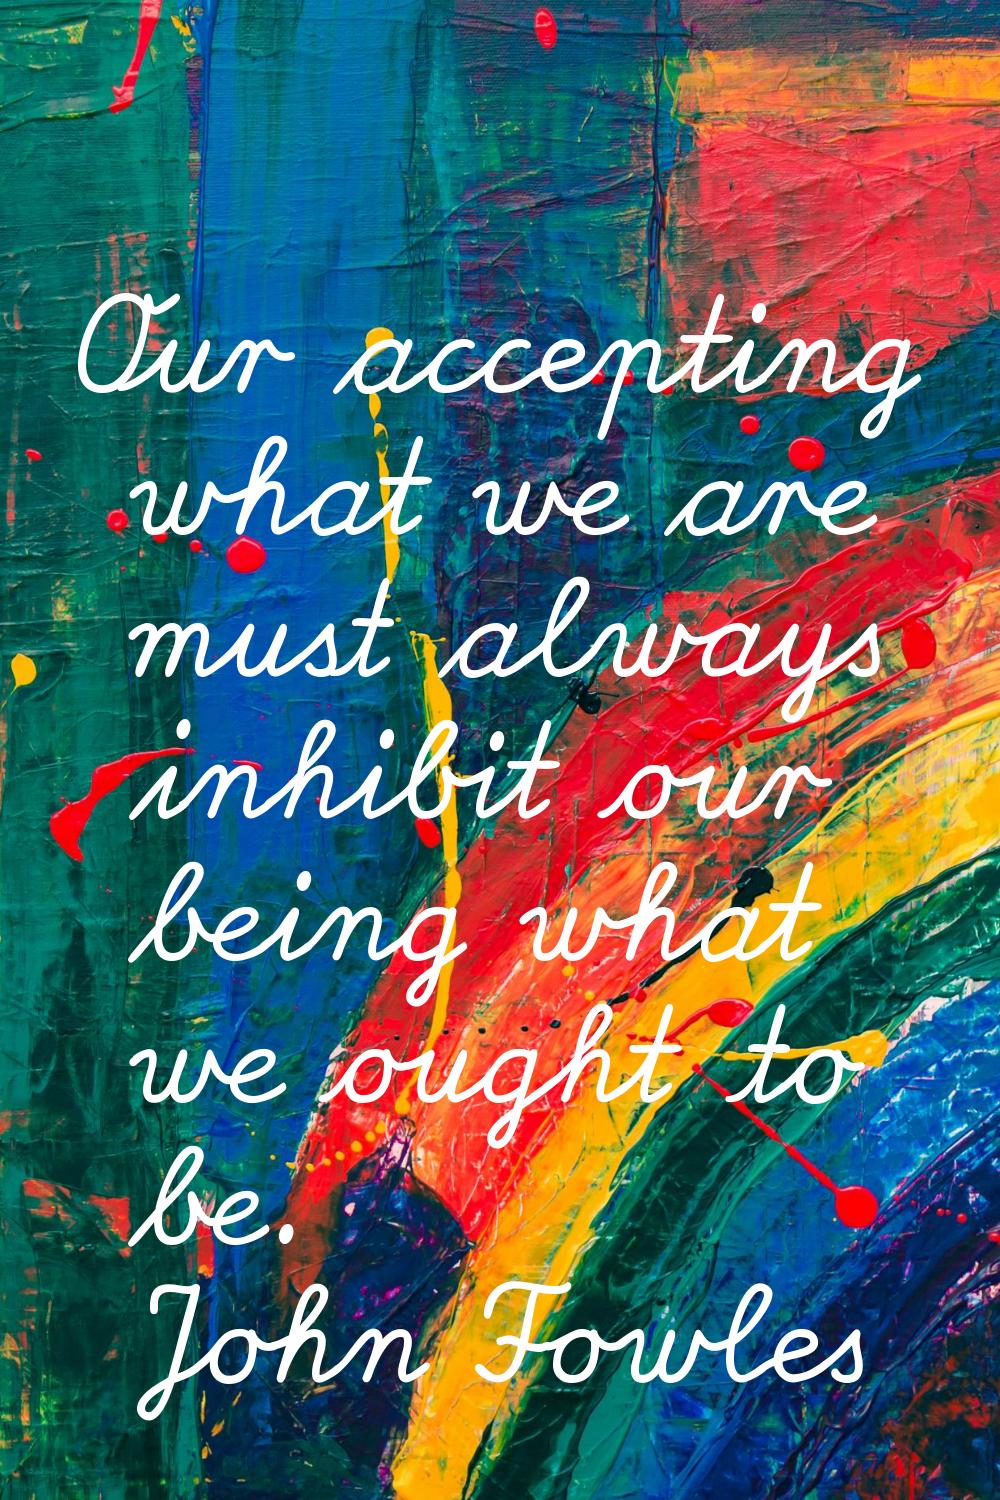 Our accepting what we are must always inhibit our being what we ought to be.